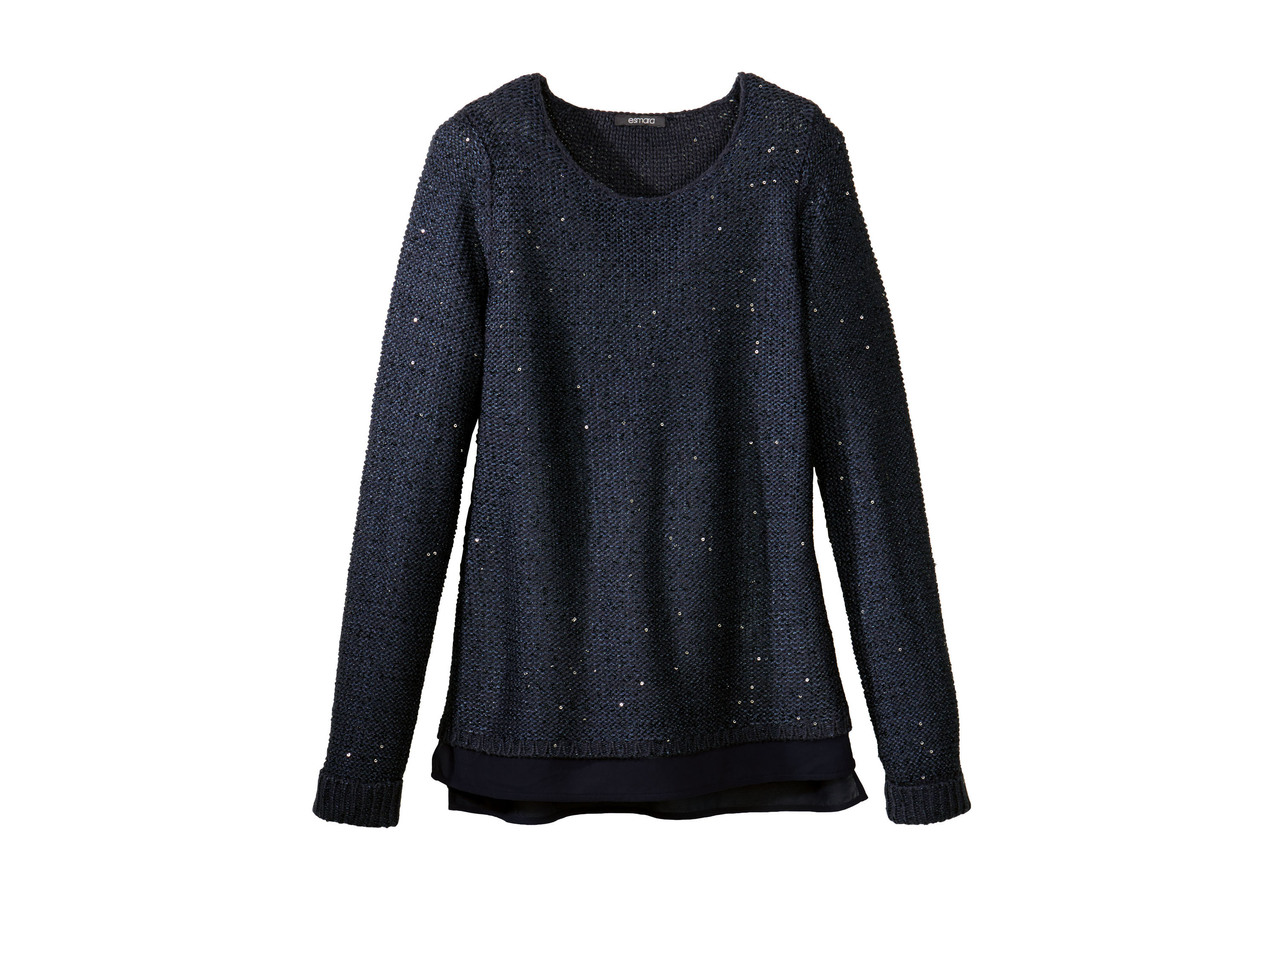 Ladies' Jumper with Shimmery Effect